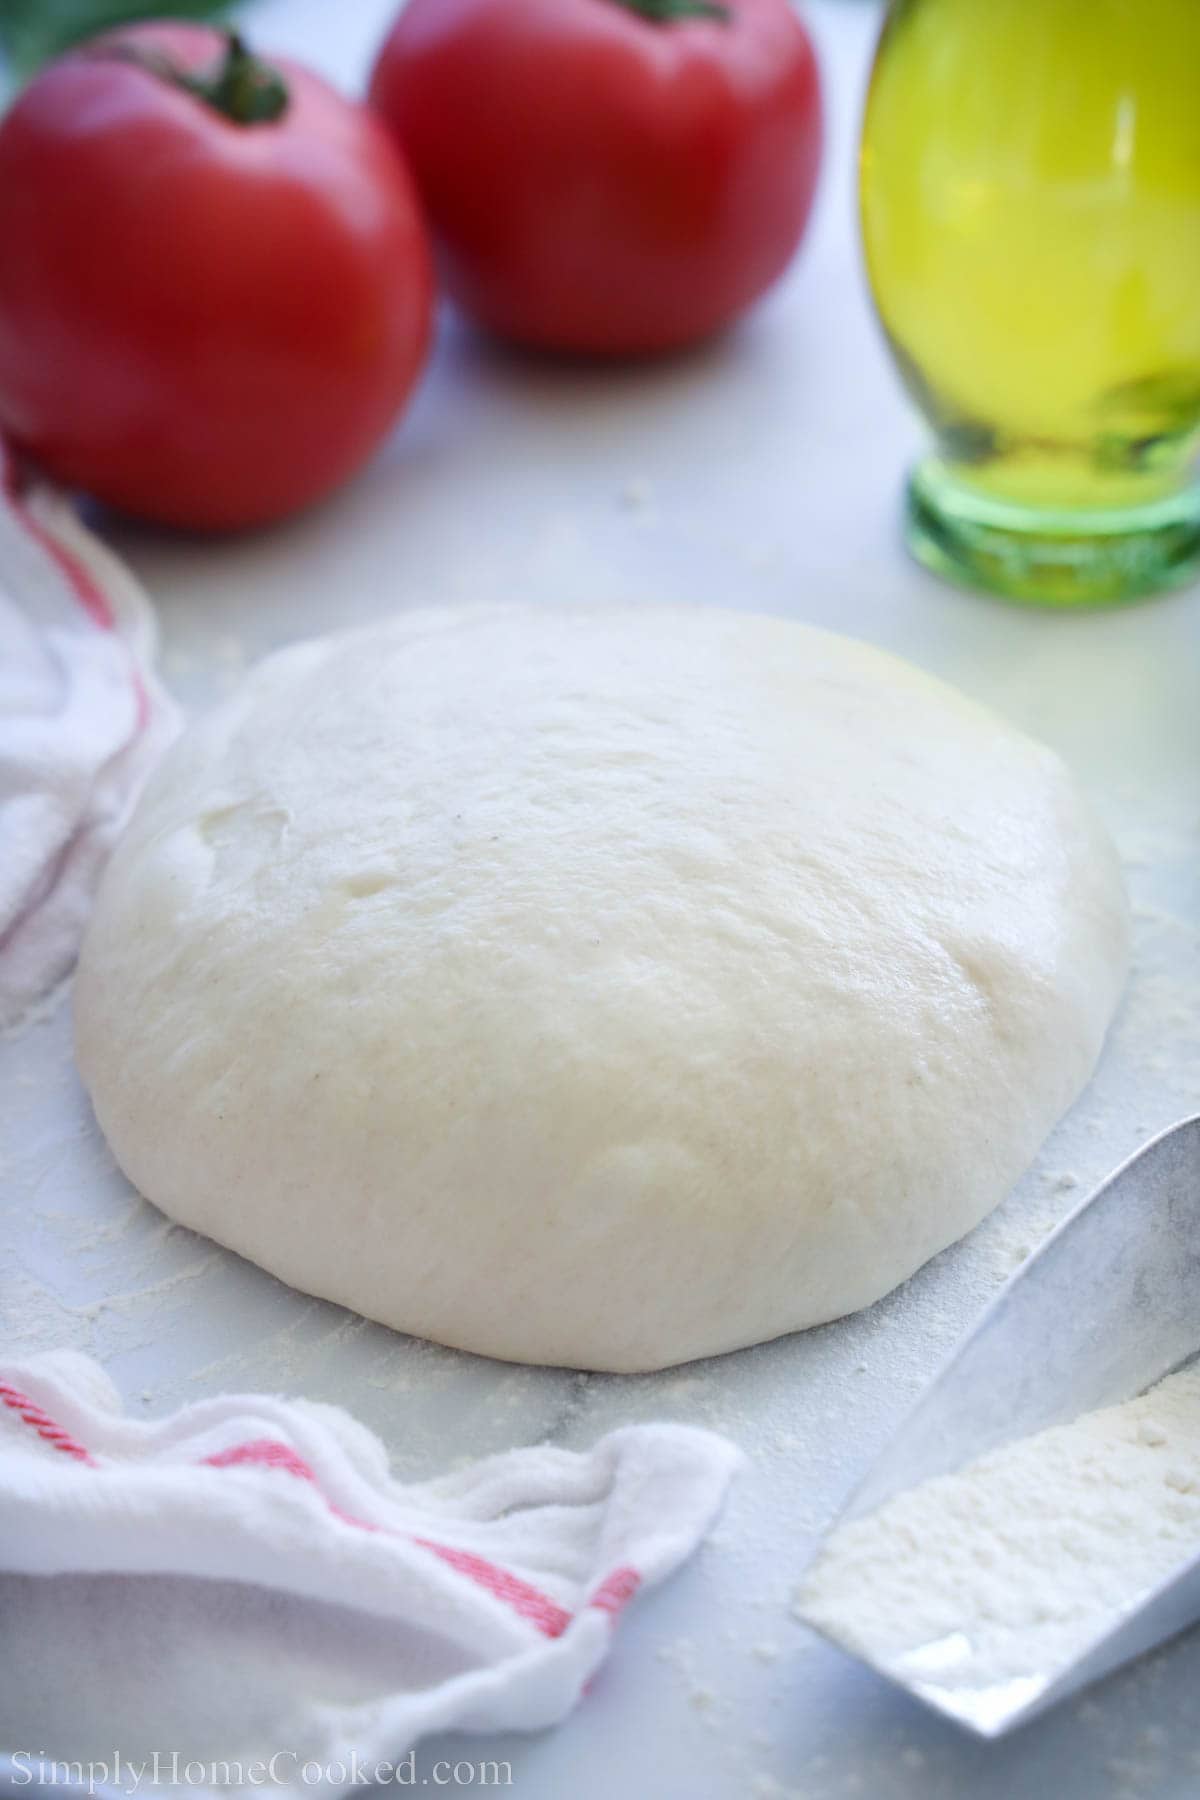 Homemade pizza dough near tomatoes and olive oil.